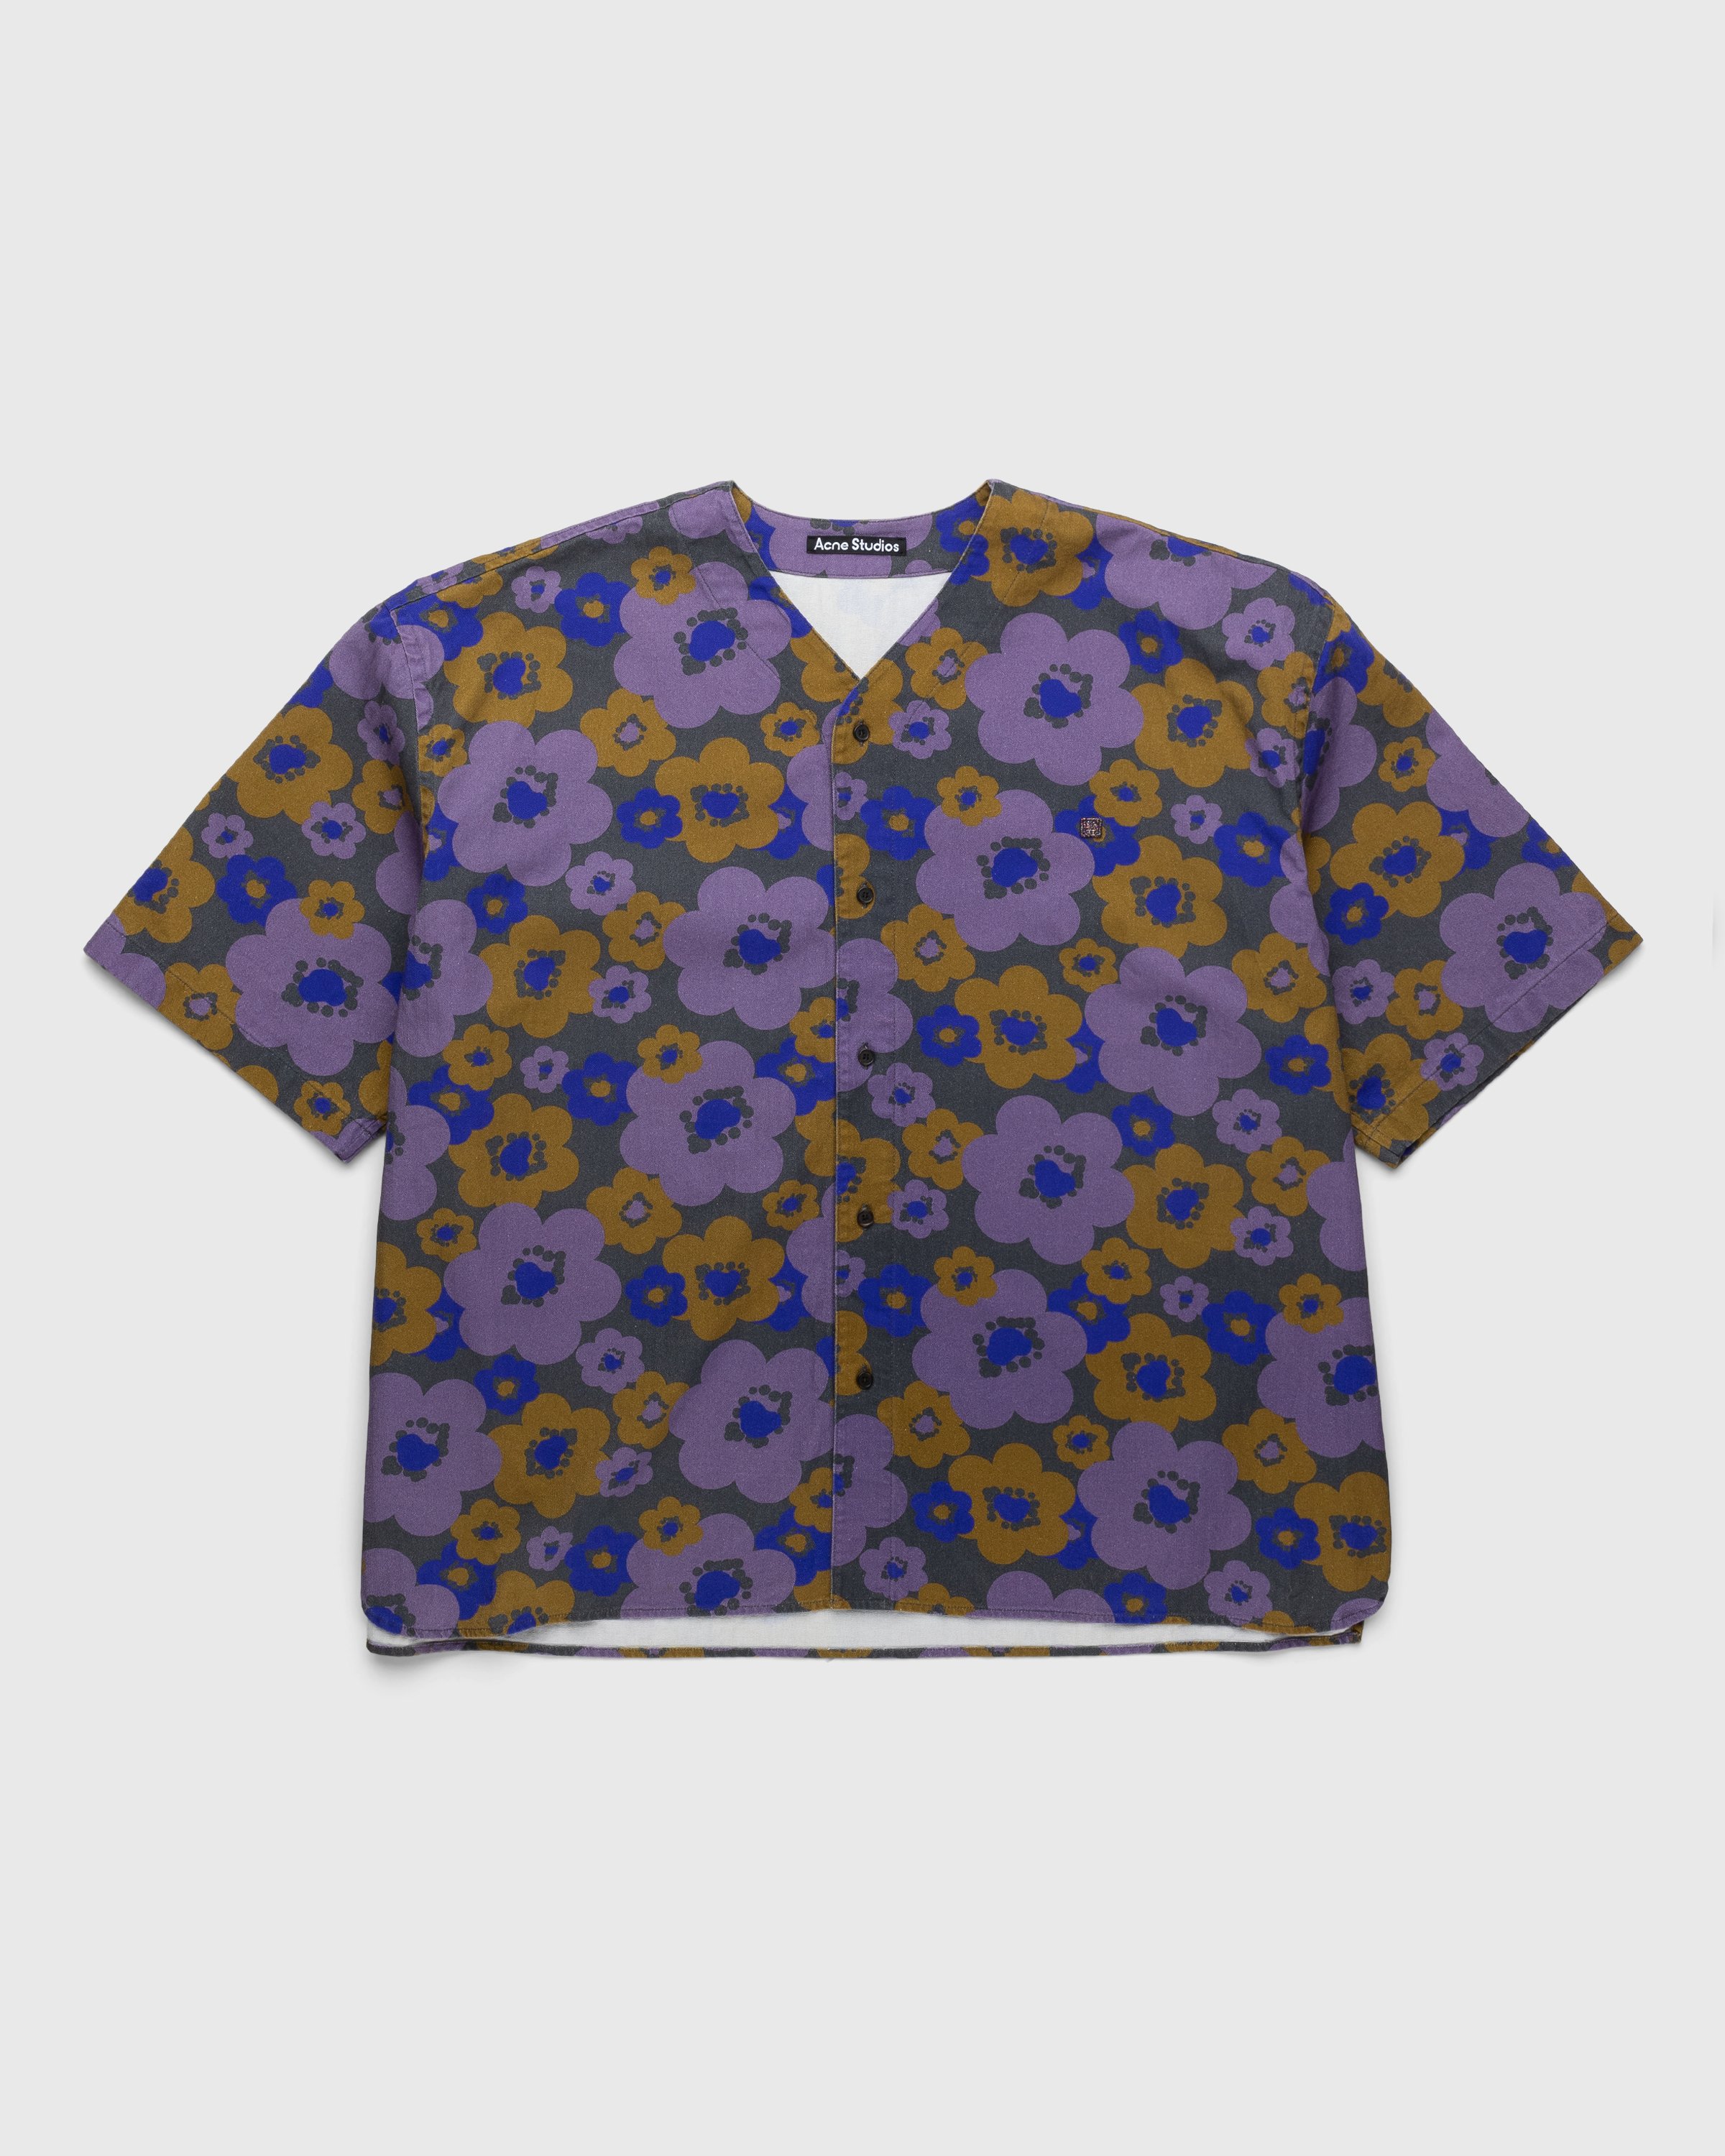 Acne Studios - Floral Short-Sleeve Button-Up Purple/Brown - Clothing - Multi - Image 1